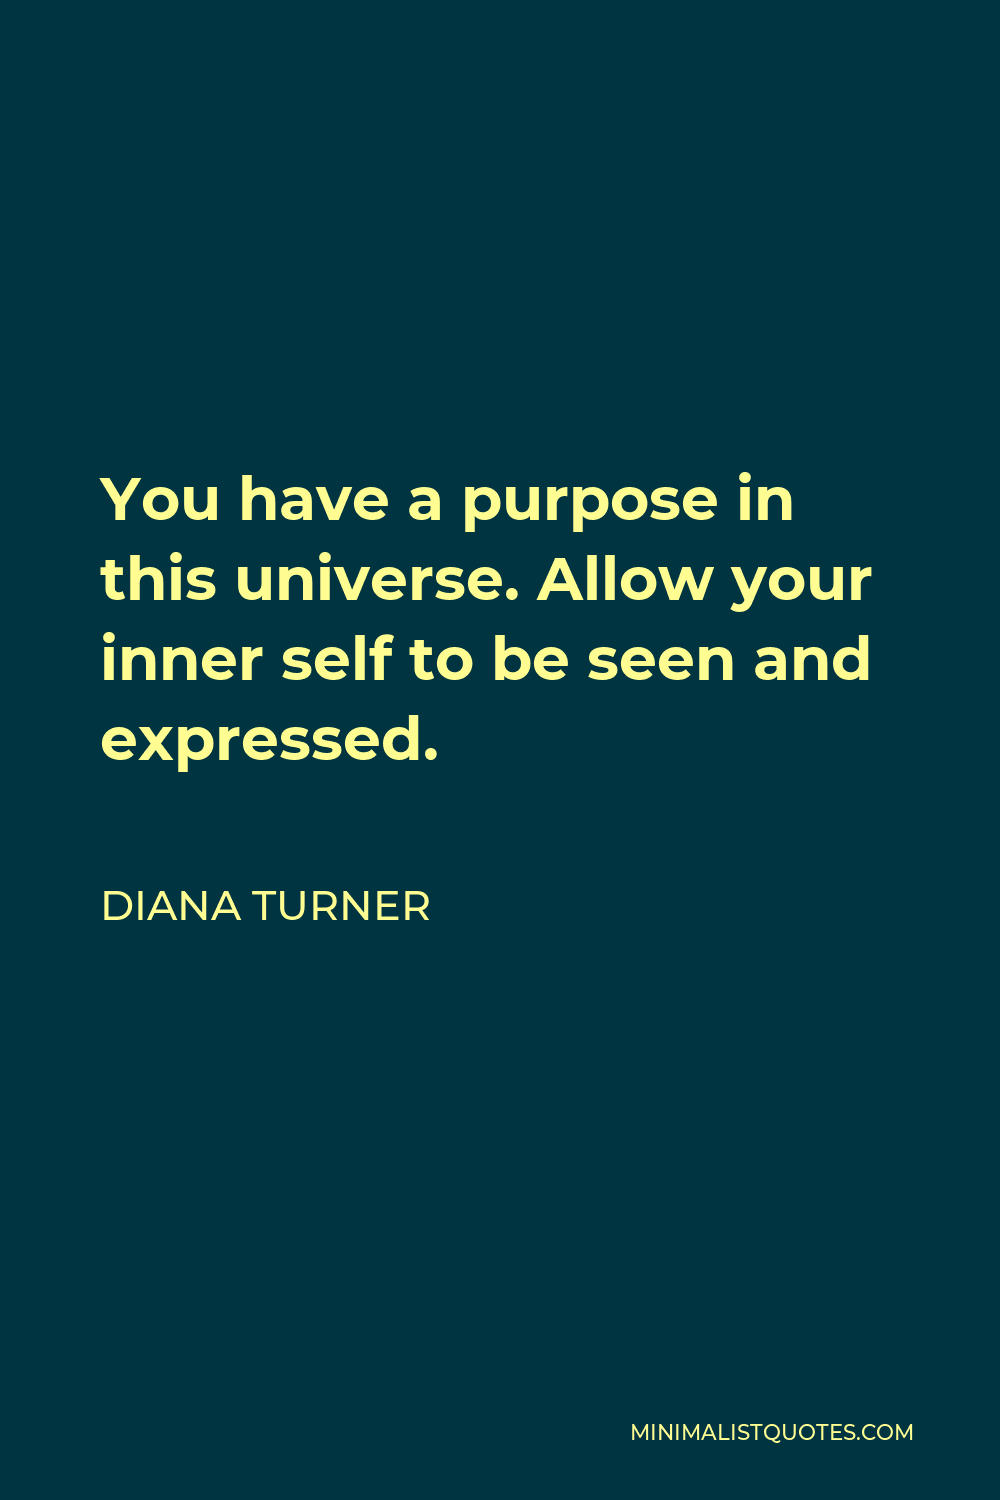 Diana Turner Quote - You have a purpose in this universe. Allow your inner self to be seen and expressed.